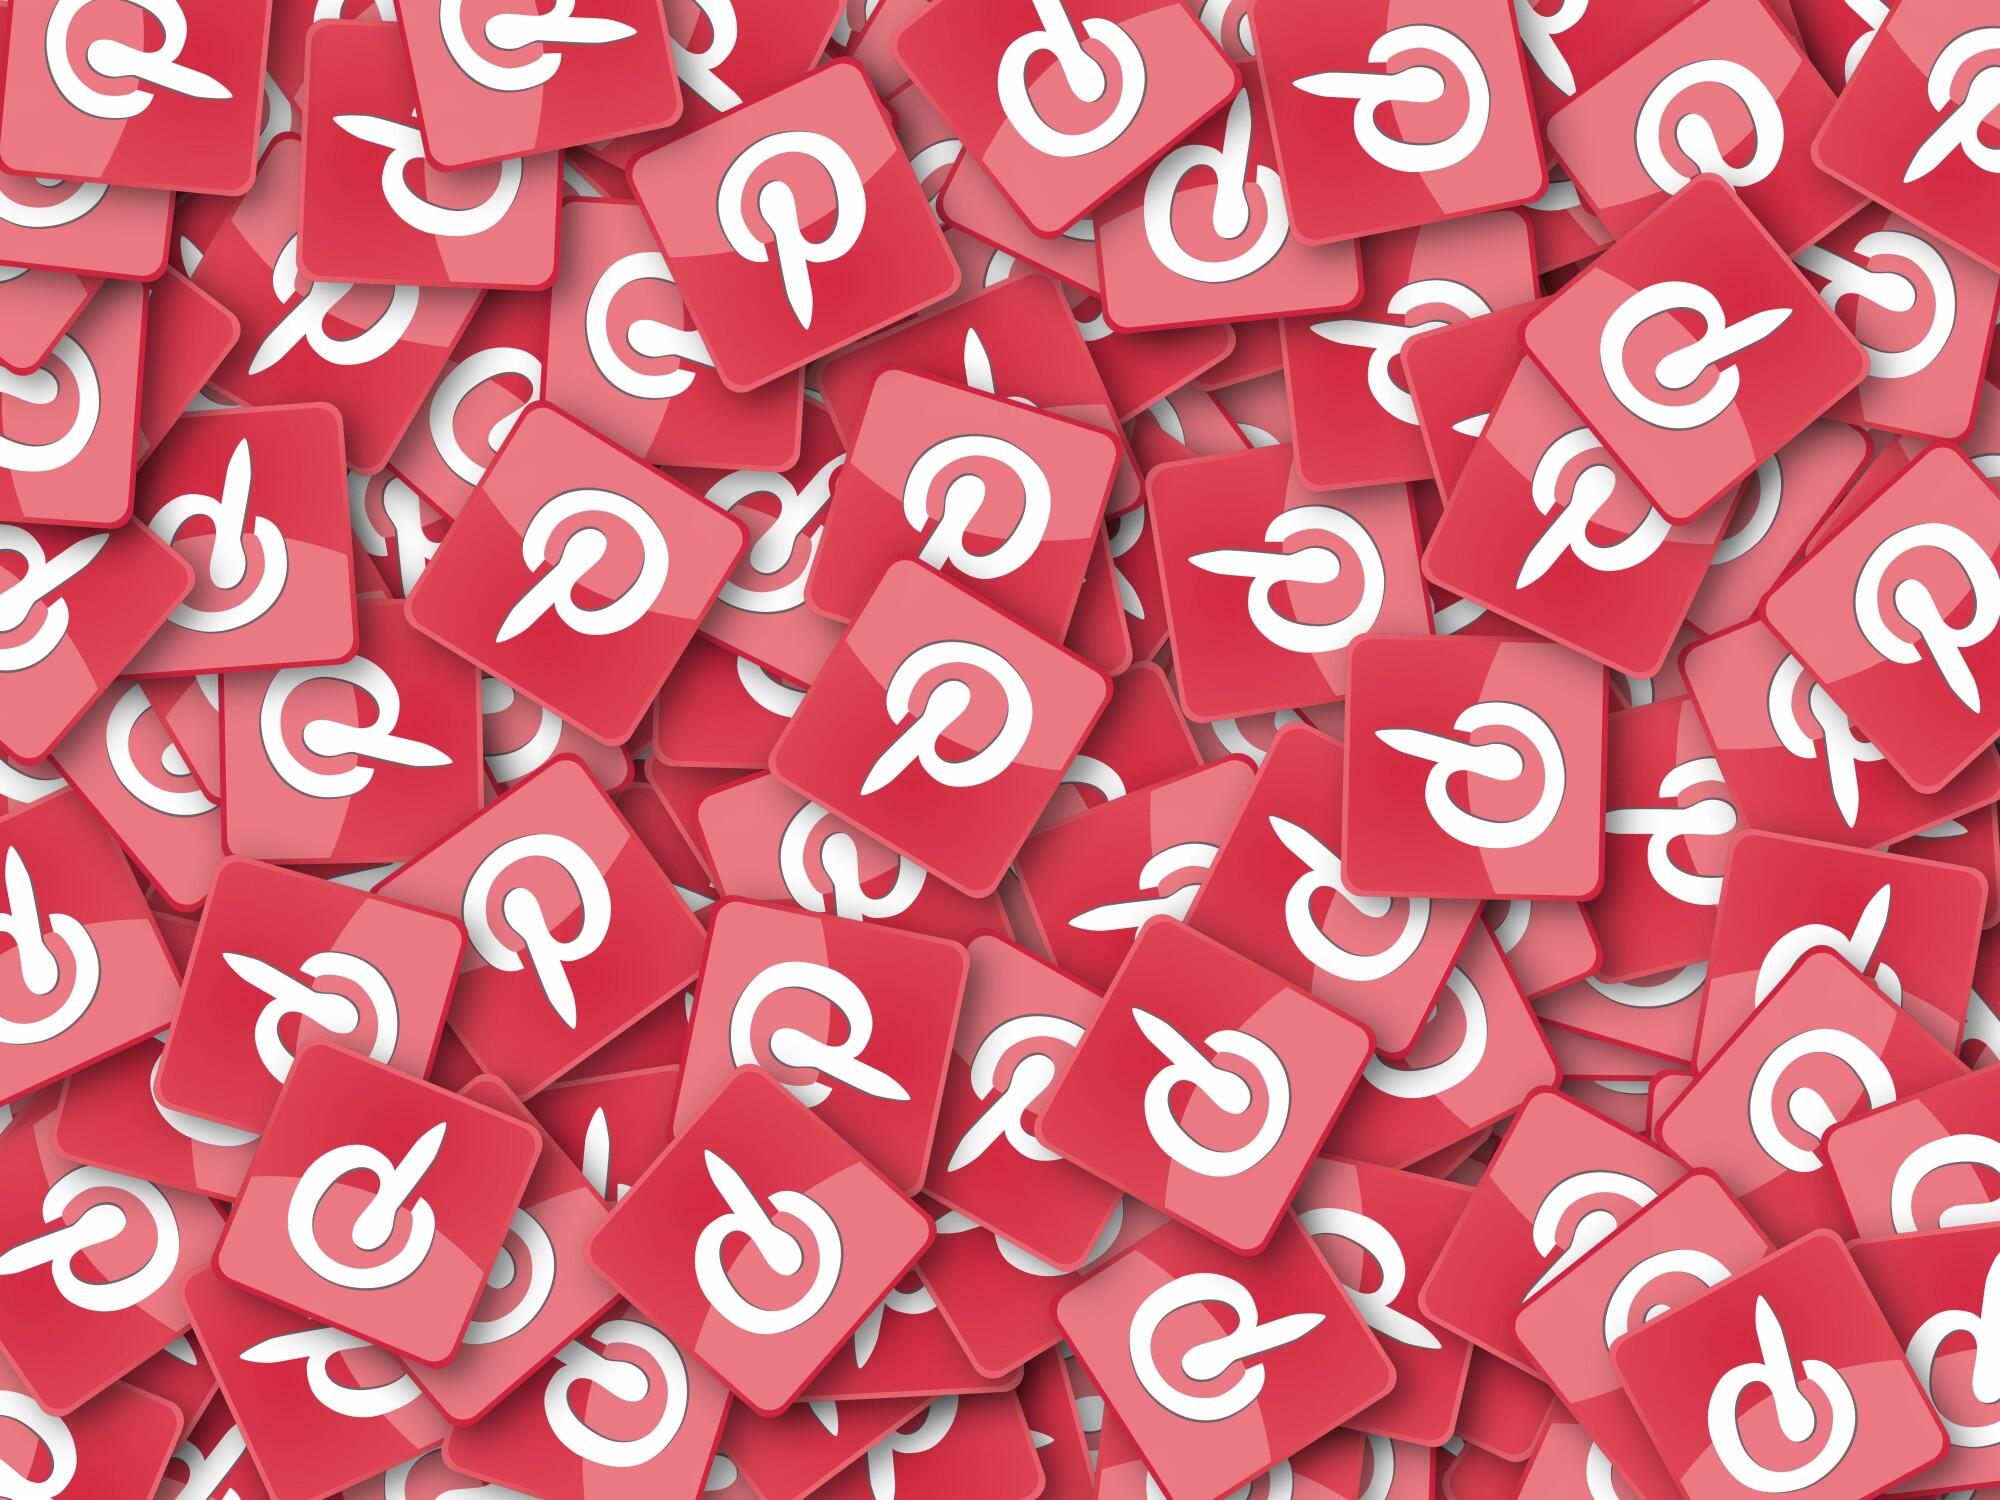 Pinterest SEO: Tips for Showing Up in Pinterest Search + Free Tool